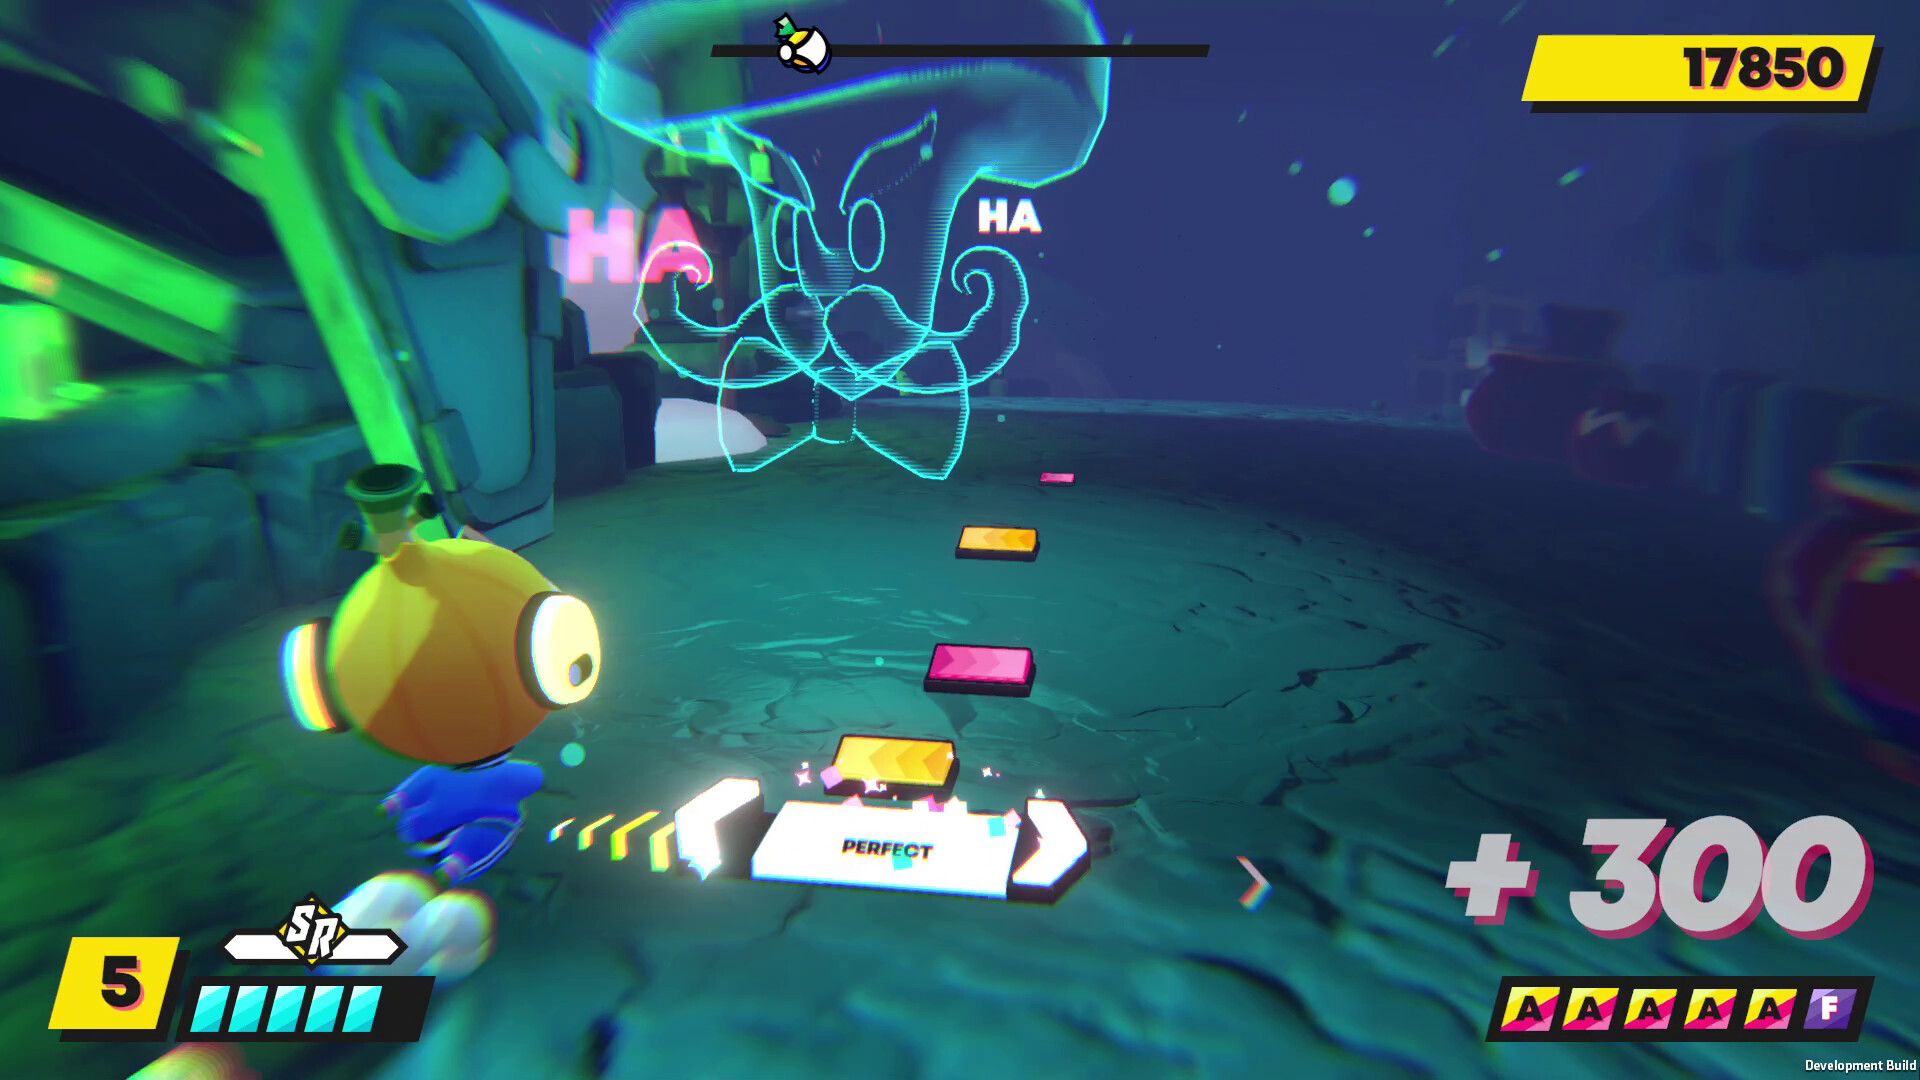 Rhythm Sprout: Sick Beats & Bad Sweets Steam CD Key 4.44 $